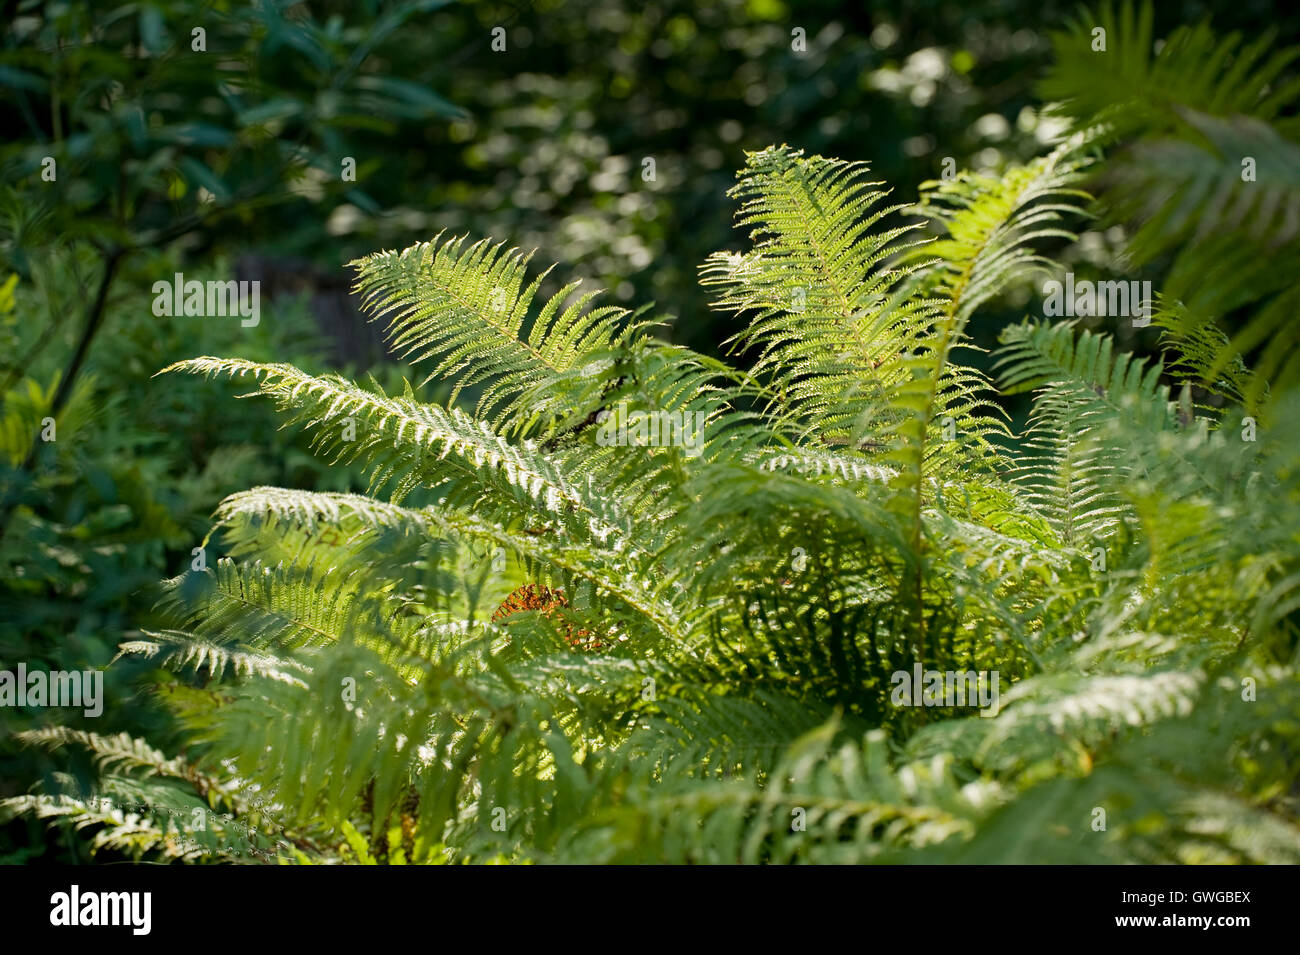 Scaly Male Fern (Dryopteris affinis). Plant in woodland. Germany Stock Photo